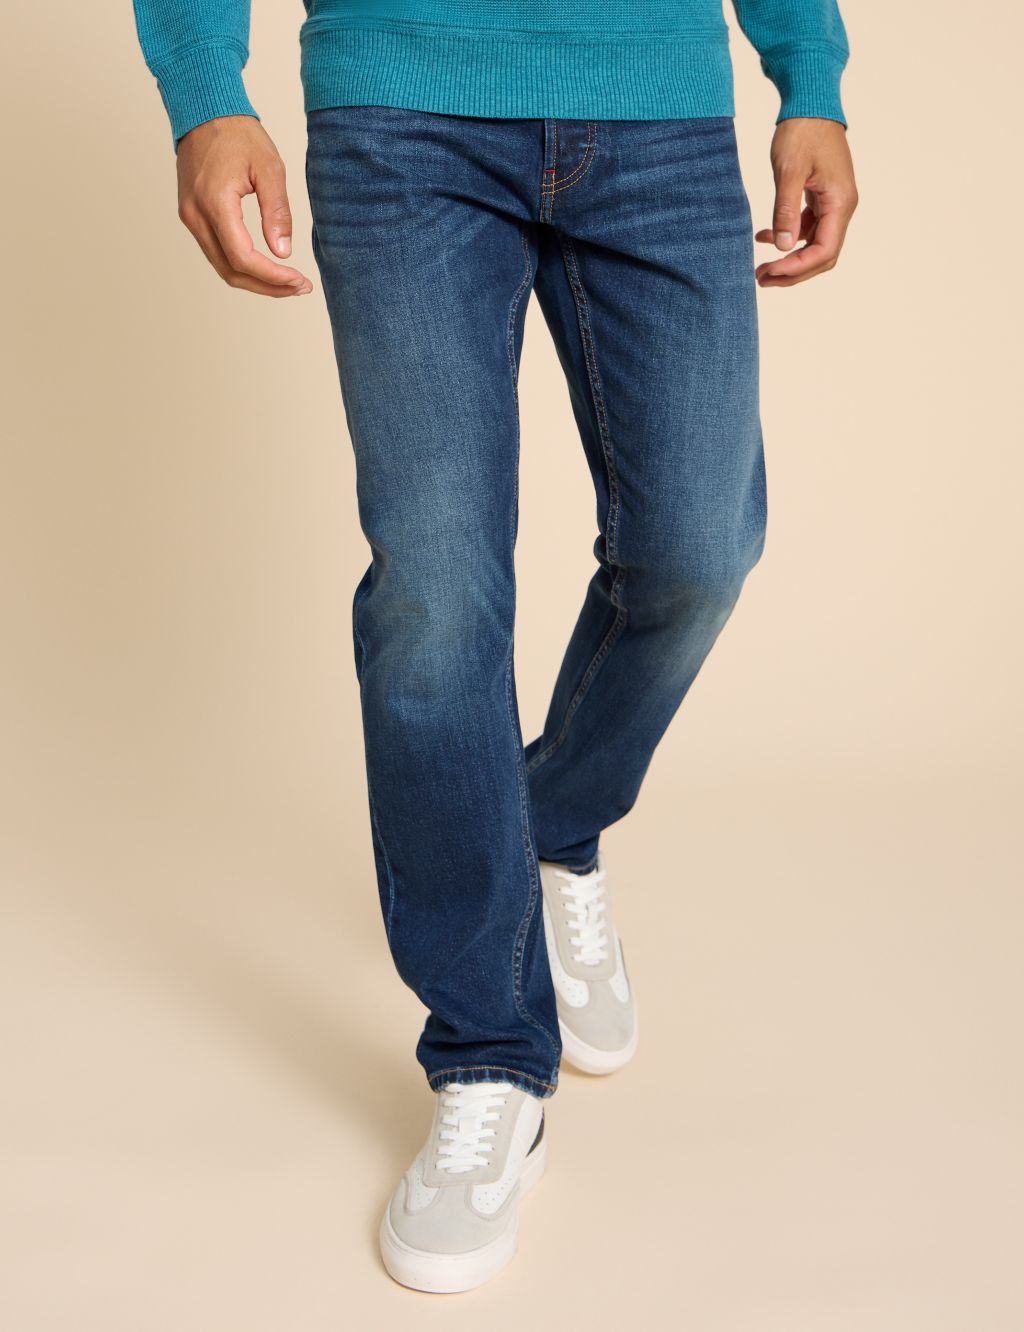 Straight Fit 5 Pocket Jeans image 3